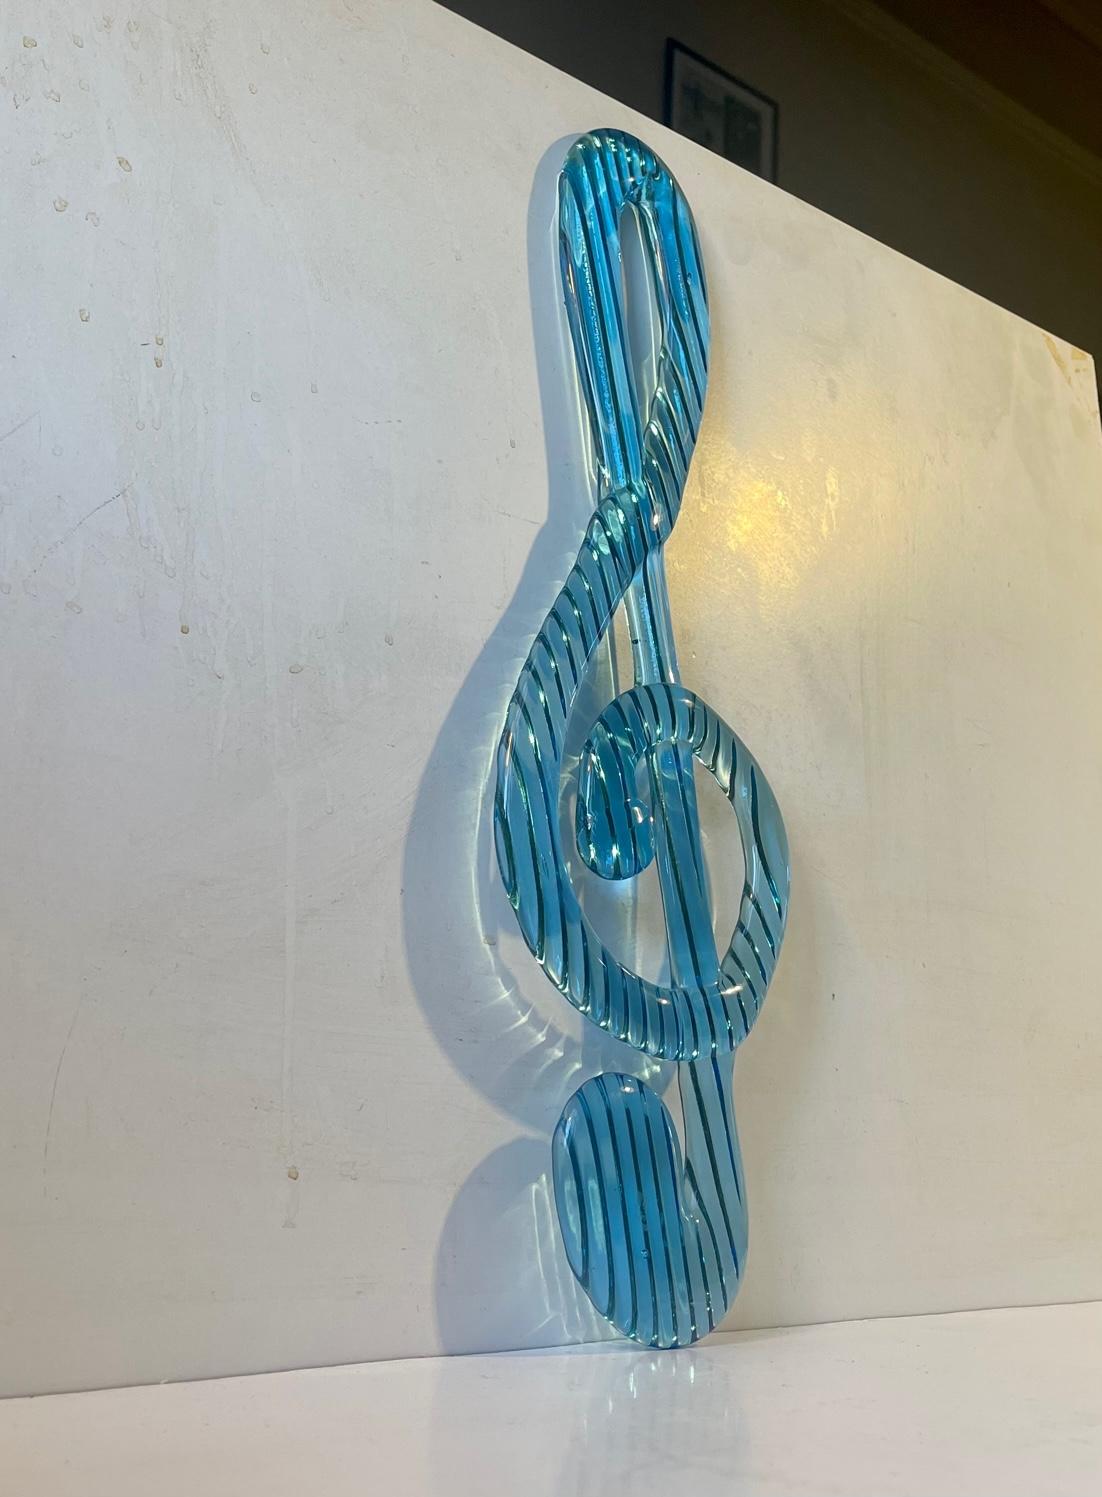 Beautiful mint/light blue glass G-Note glass sculpture/relief in fine intact condition. These wall decorations were produced from 1970 until 1983, at Bergdala Glassworks Sweden. They were all designed and handmade by glass-blower Elving Conradsson.